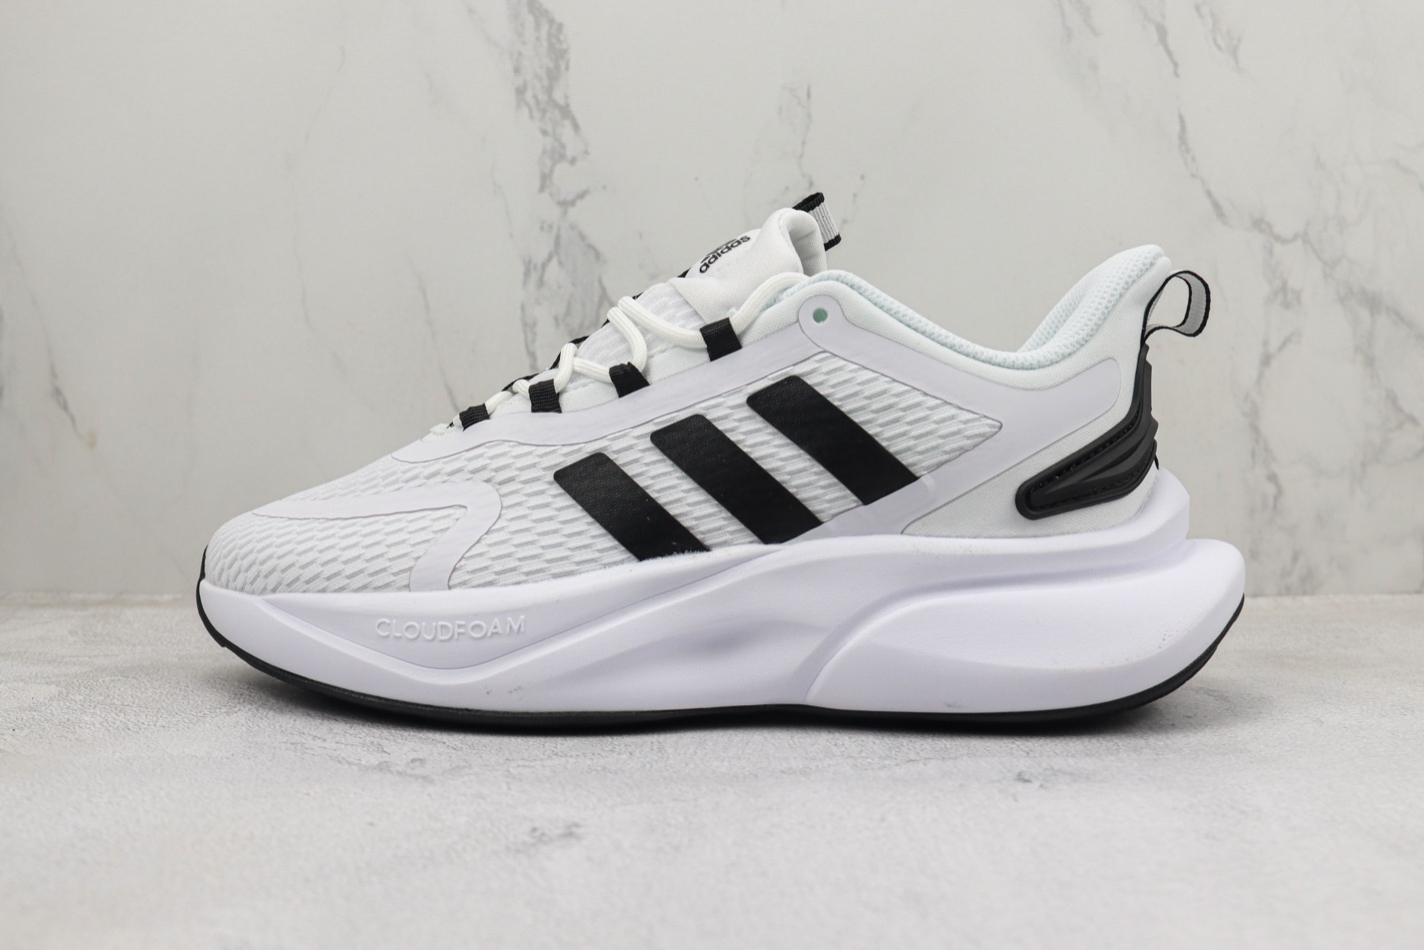 Adidas AlphaBounce Cloud White Core Black HP6146 - Stylish and Versatile Running Shoes